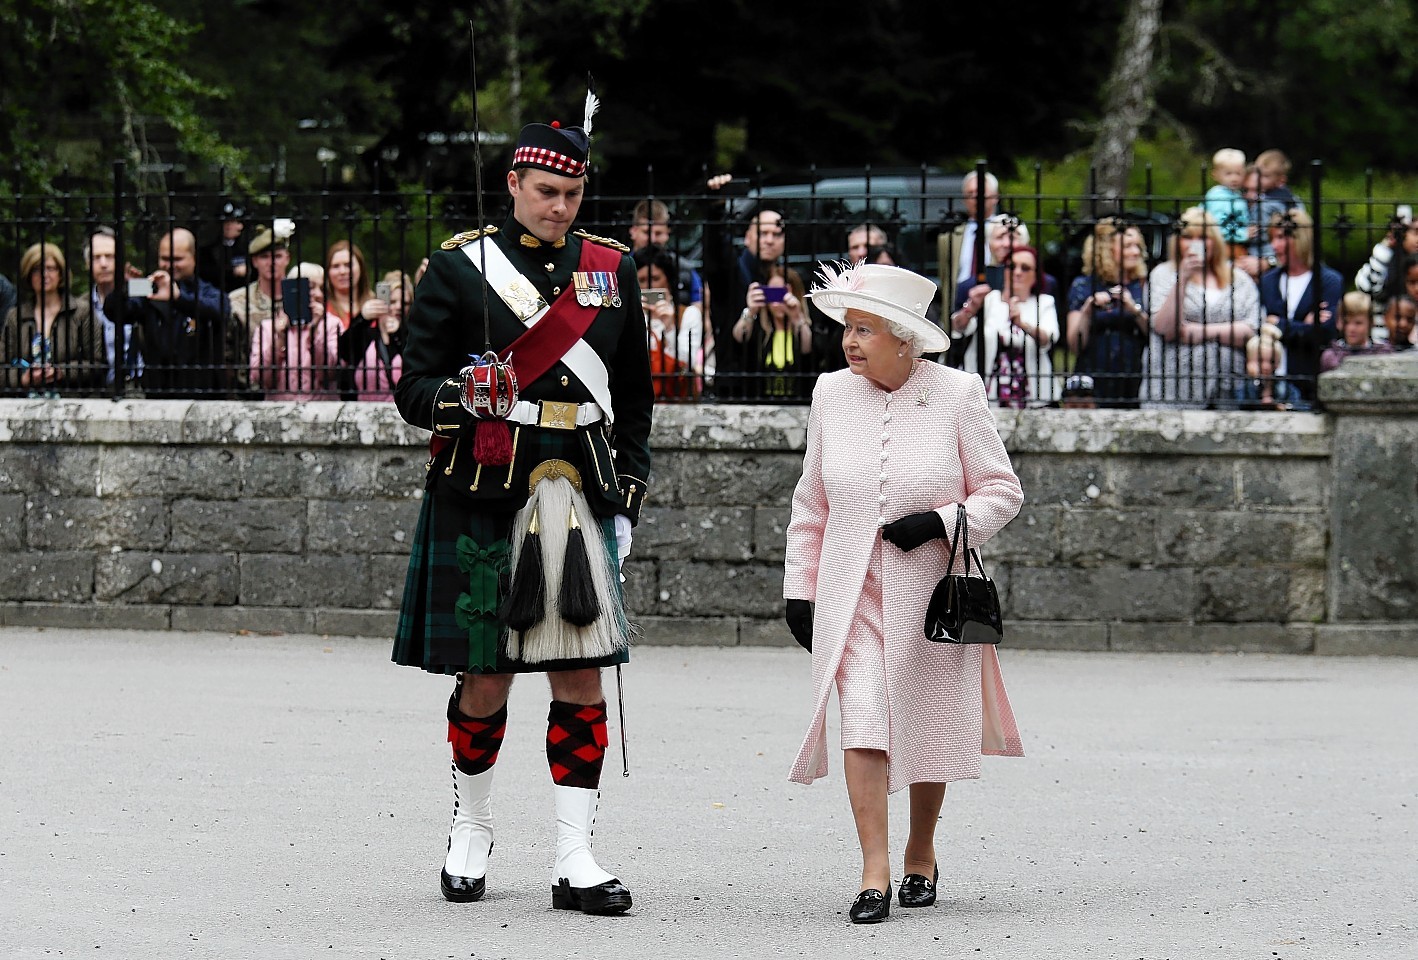 Queen summer residence at Balmoral 2015